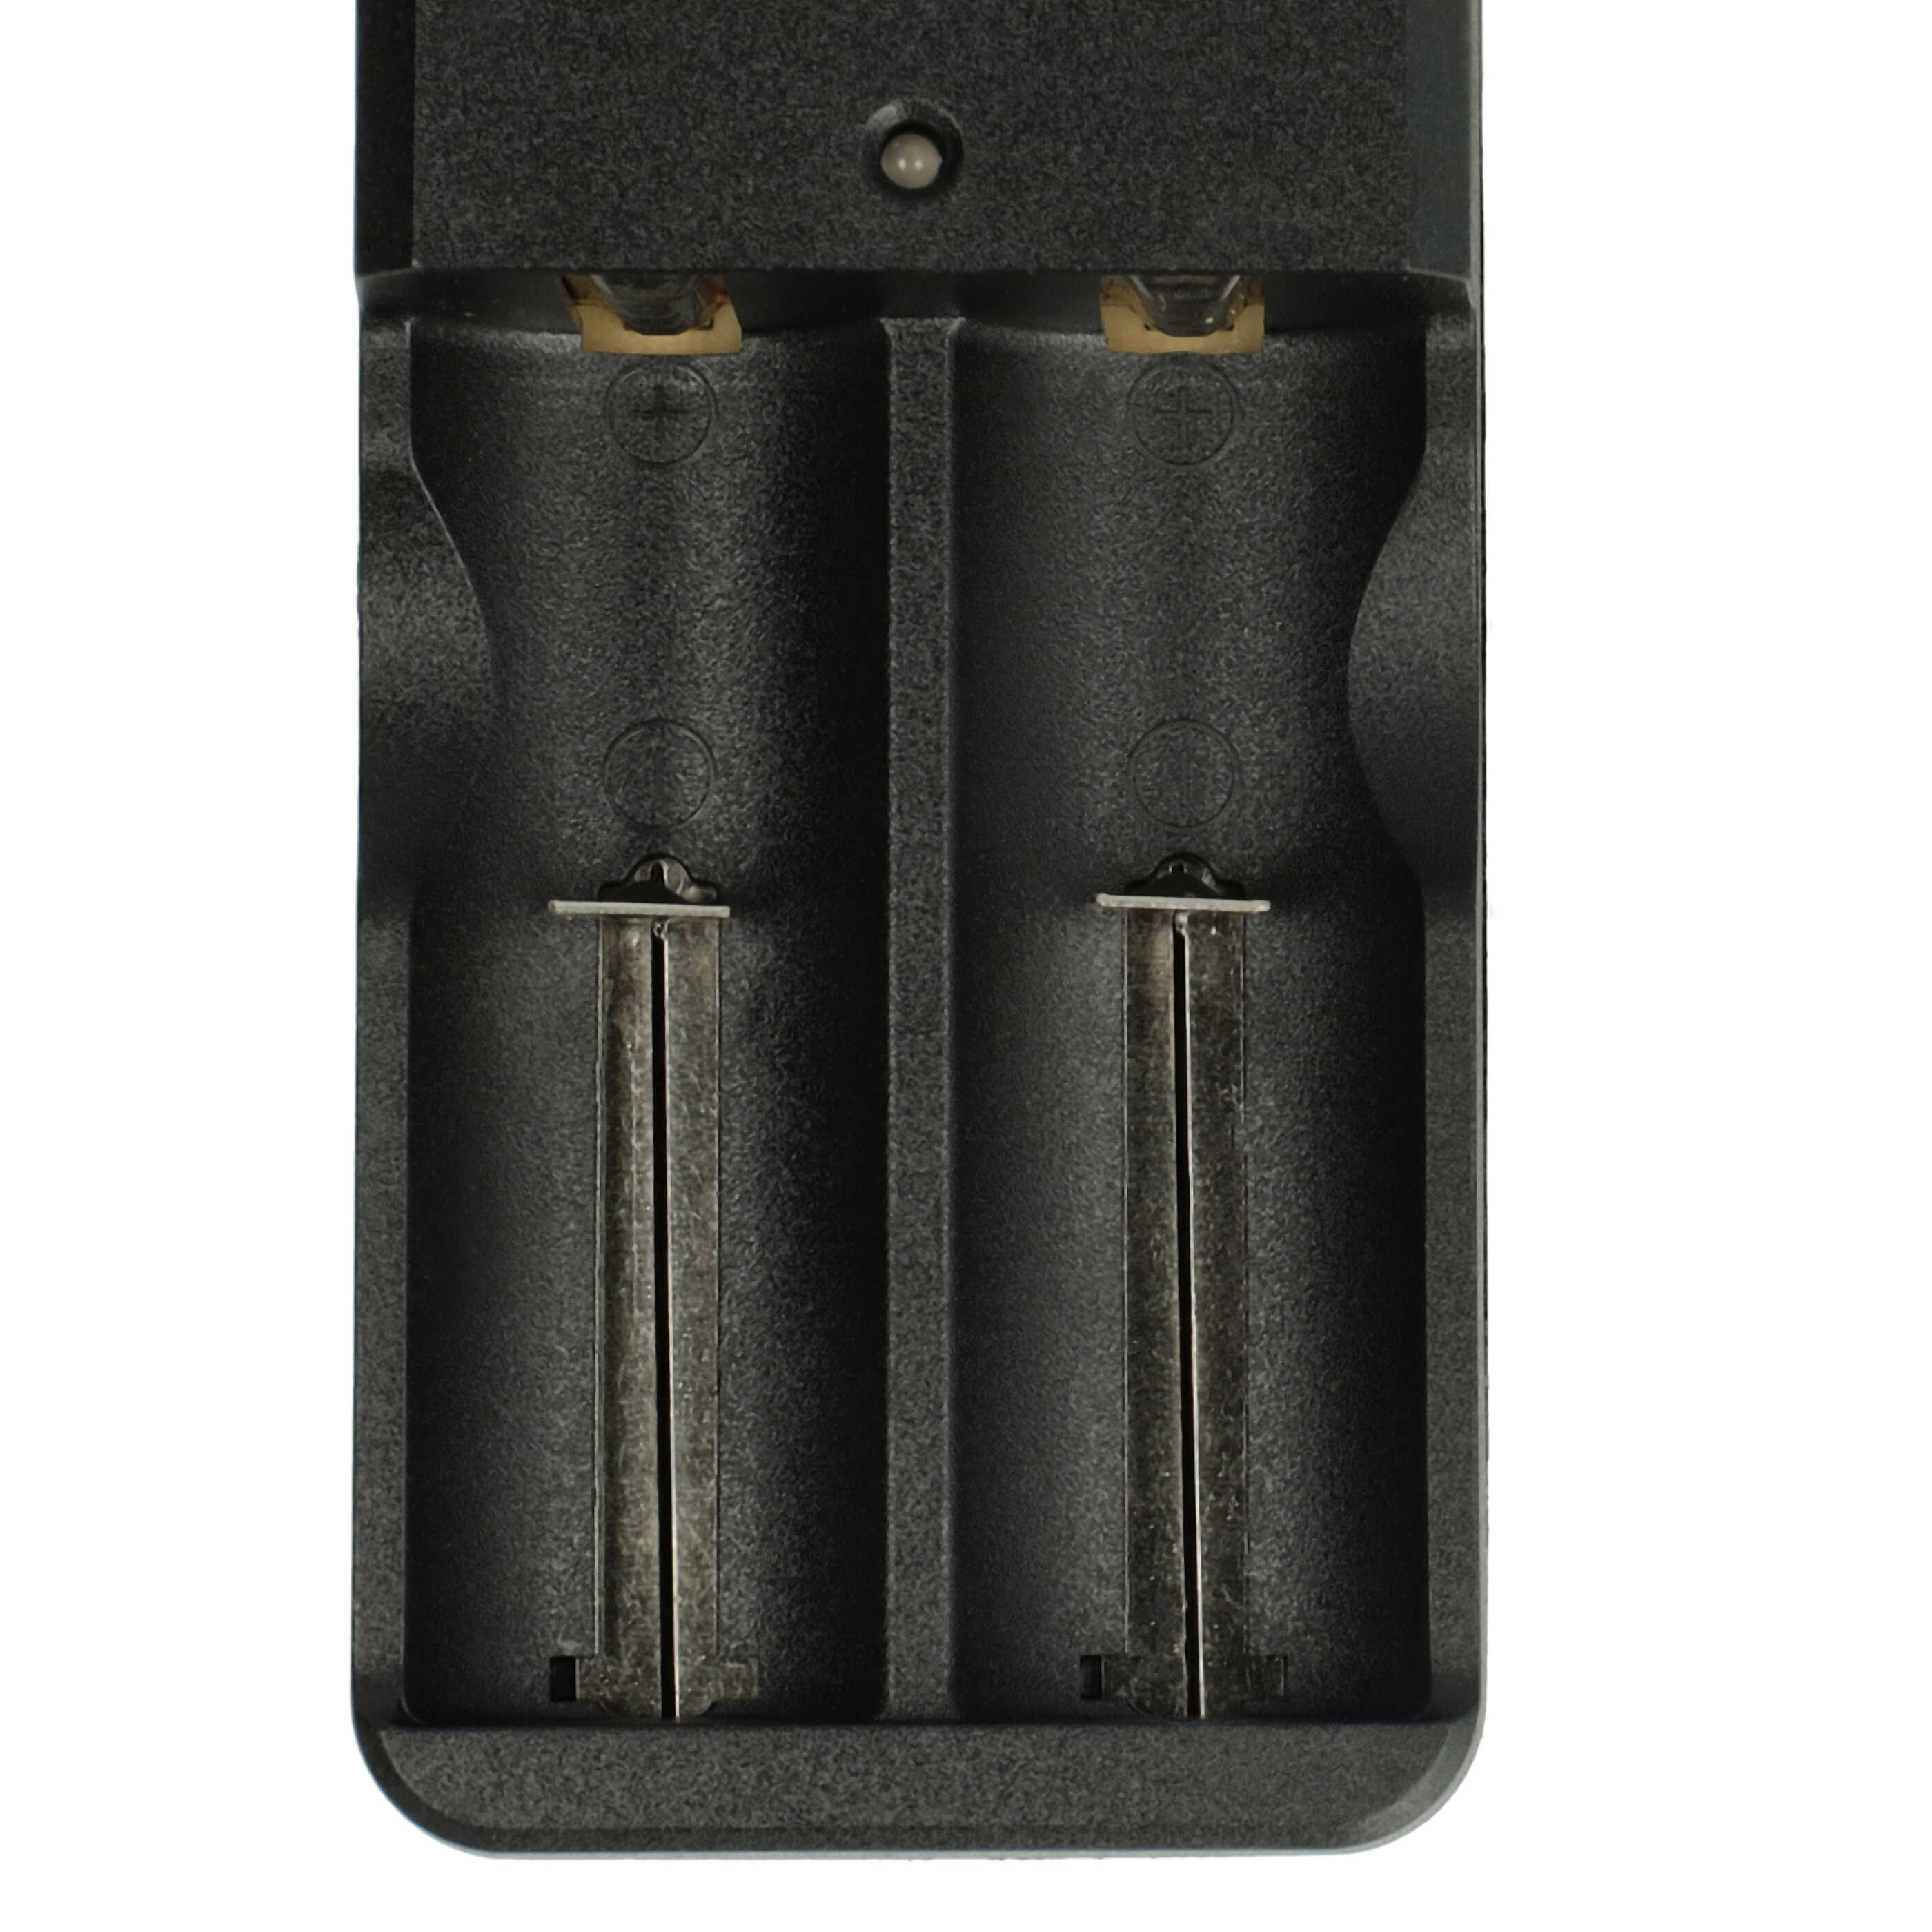 2 Slot Charger suitable for CR123A Li-Ion Battery Cells